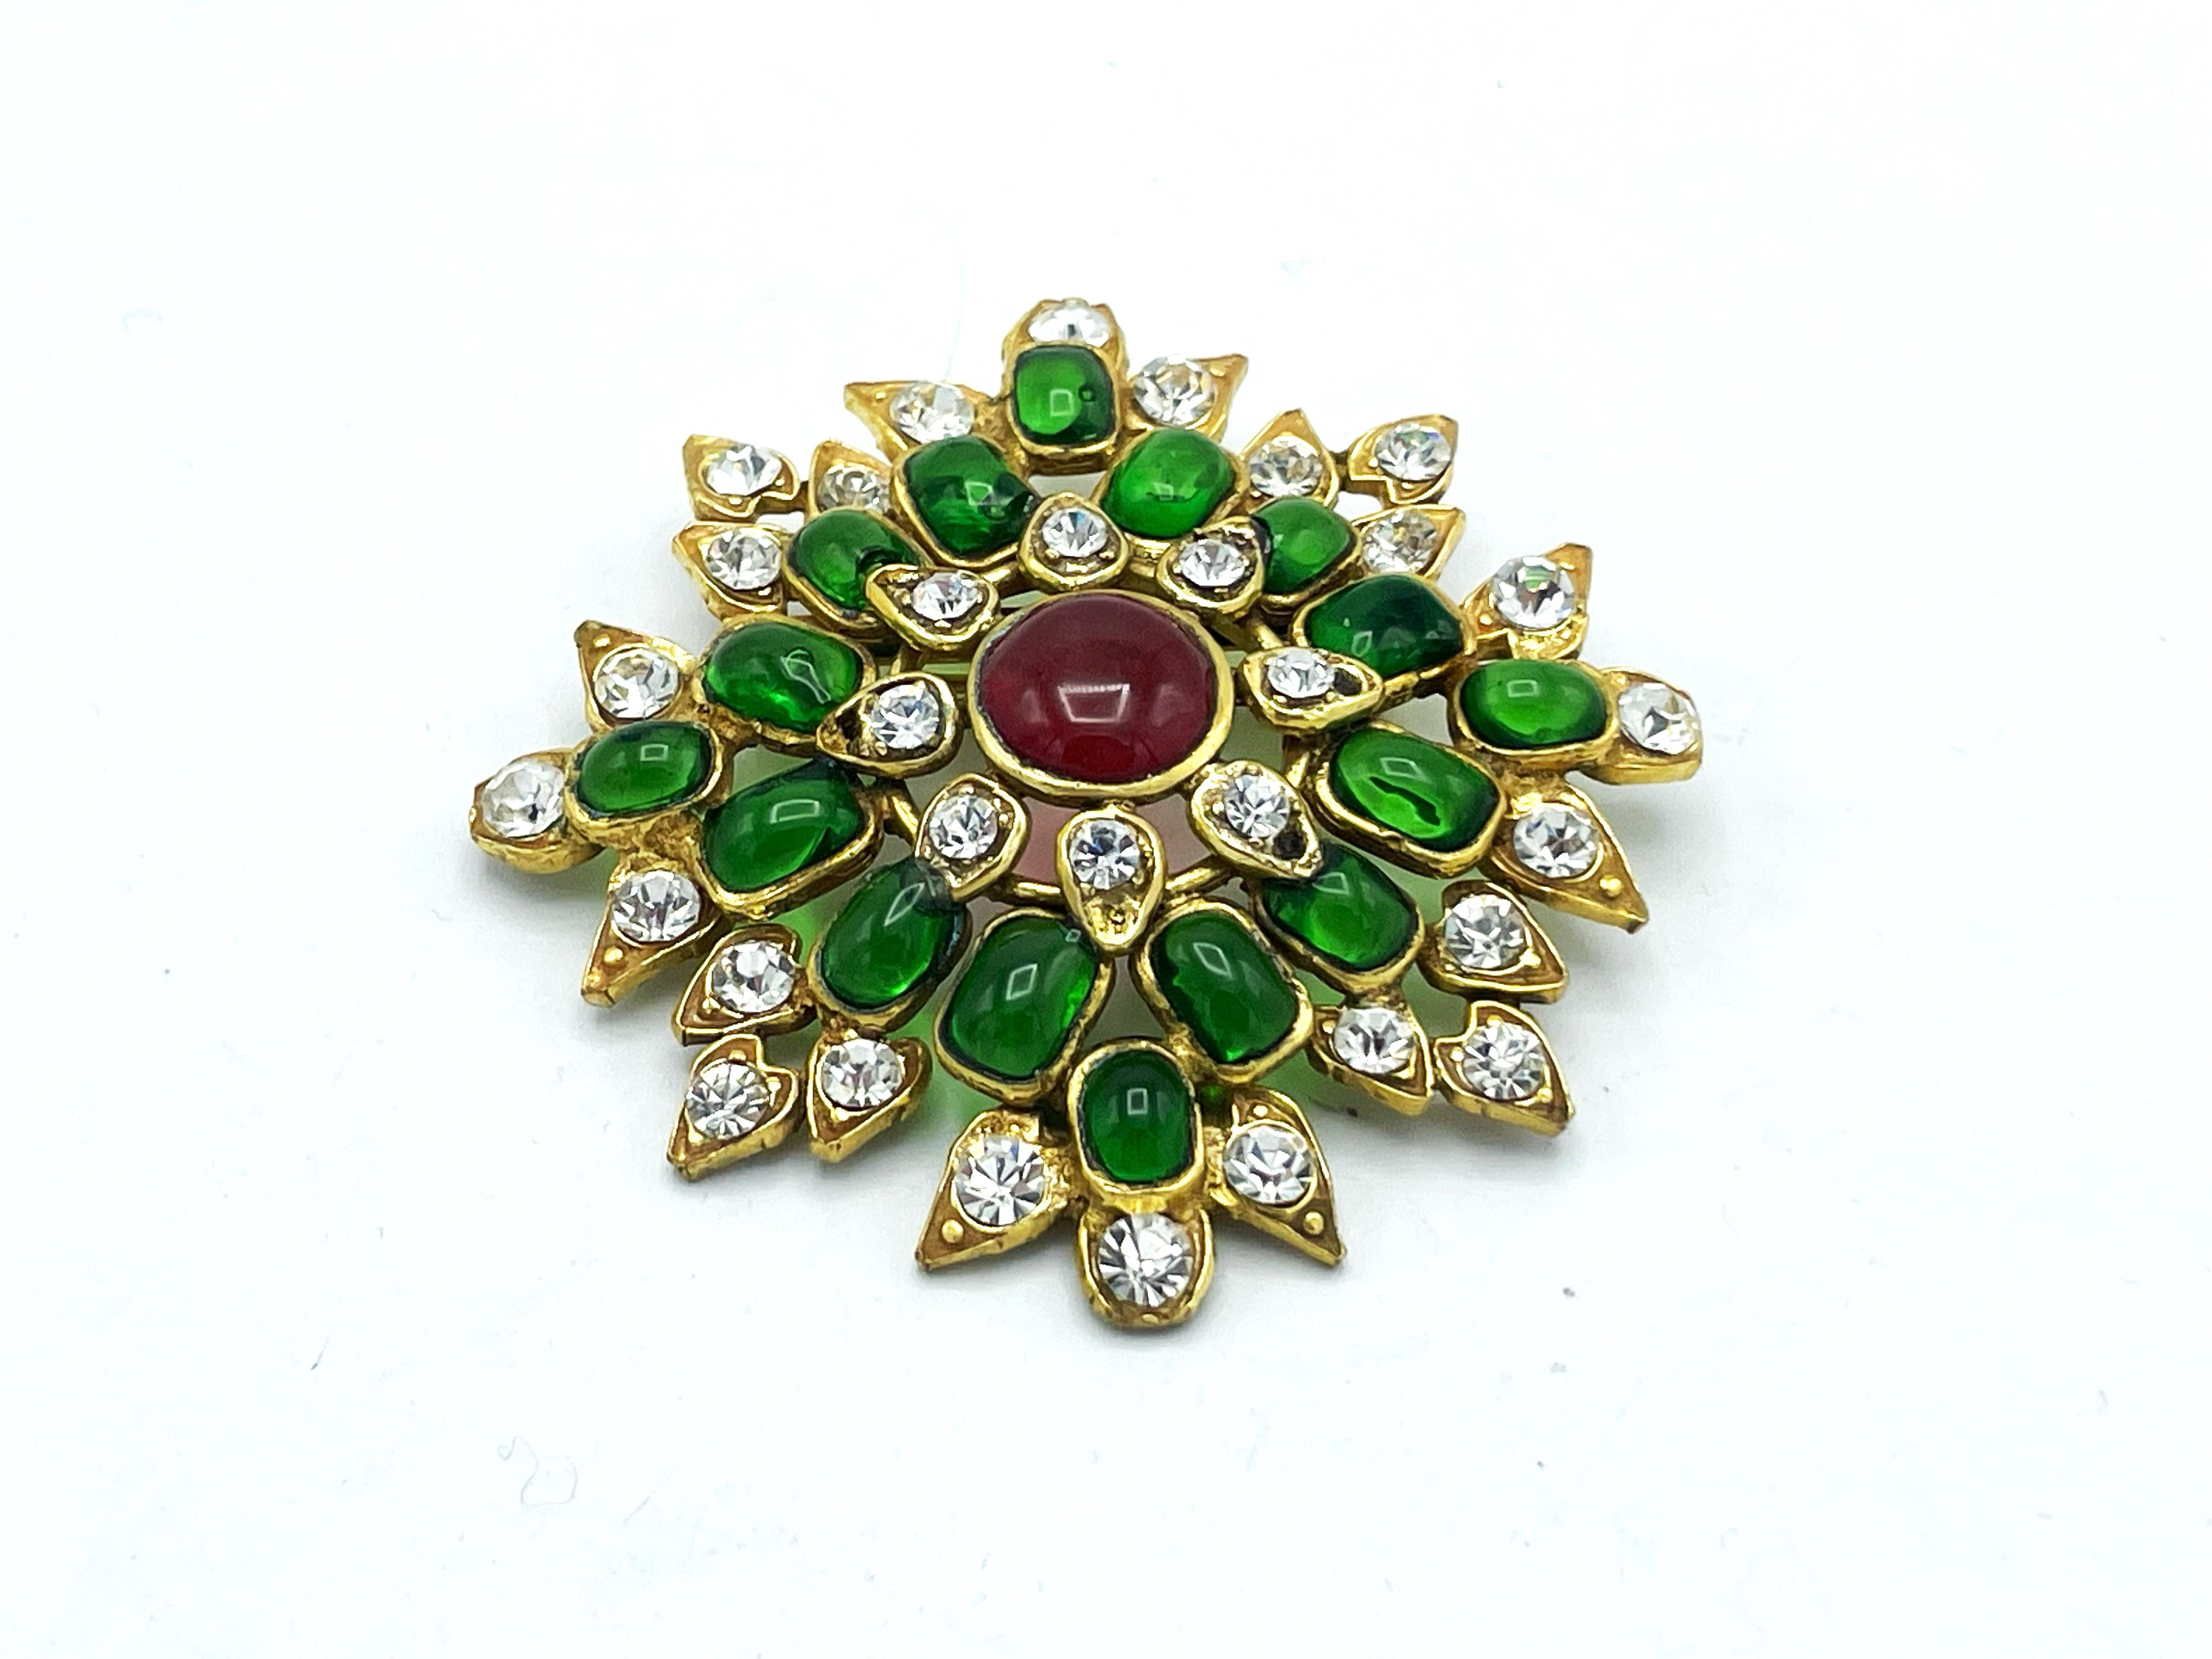 Early CHANEL BROOCH ( Made in France) signed 1970/80's made by Maison Gripoix Paris, with green and red Gripoix glass and with clear, cut rhinestones. Best condition! 

Dimensions:
Height 6cm
Width   6cm 
Features
- Signed CHANEL 1970/80's Made in